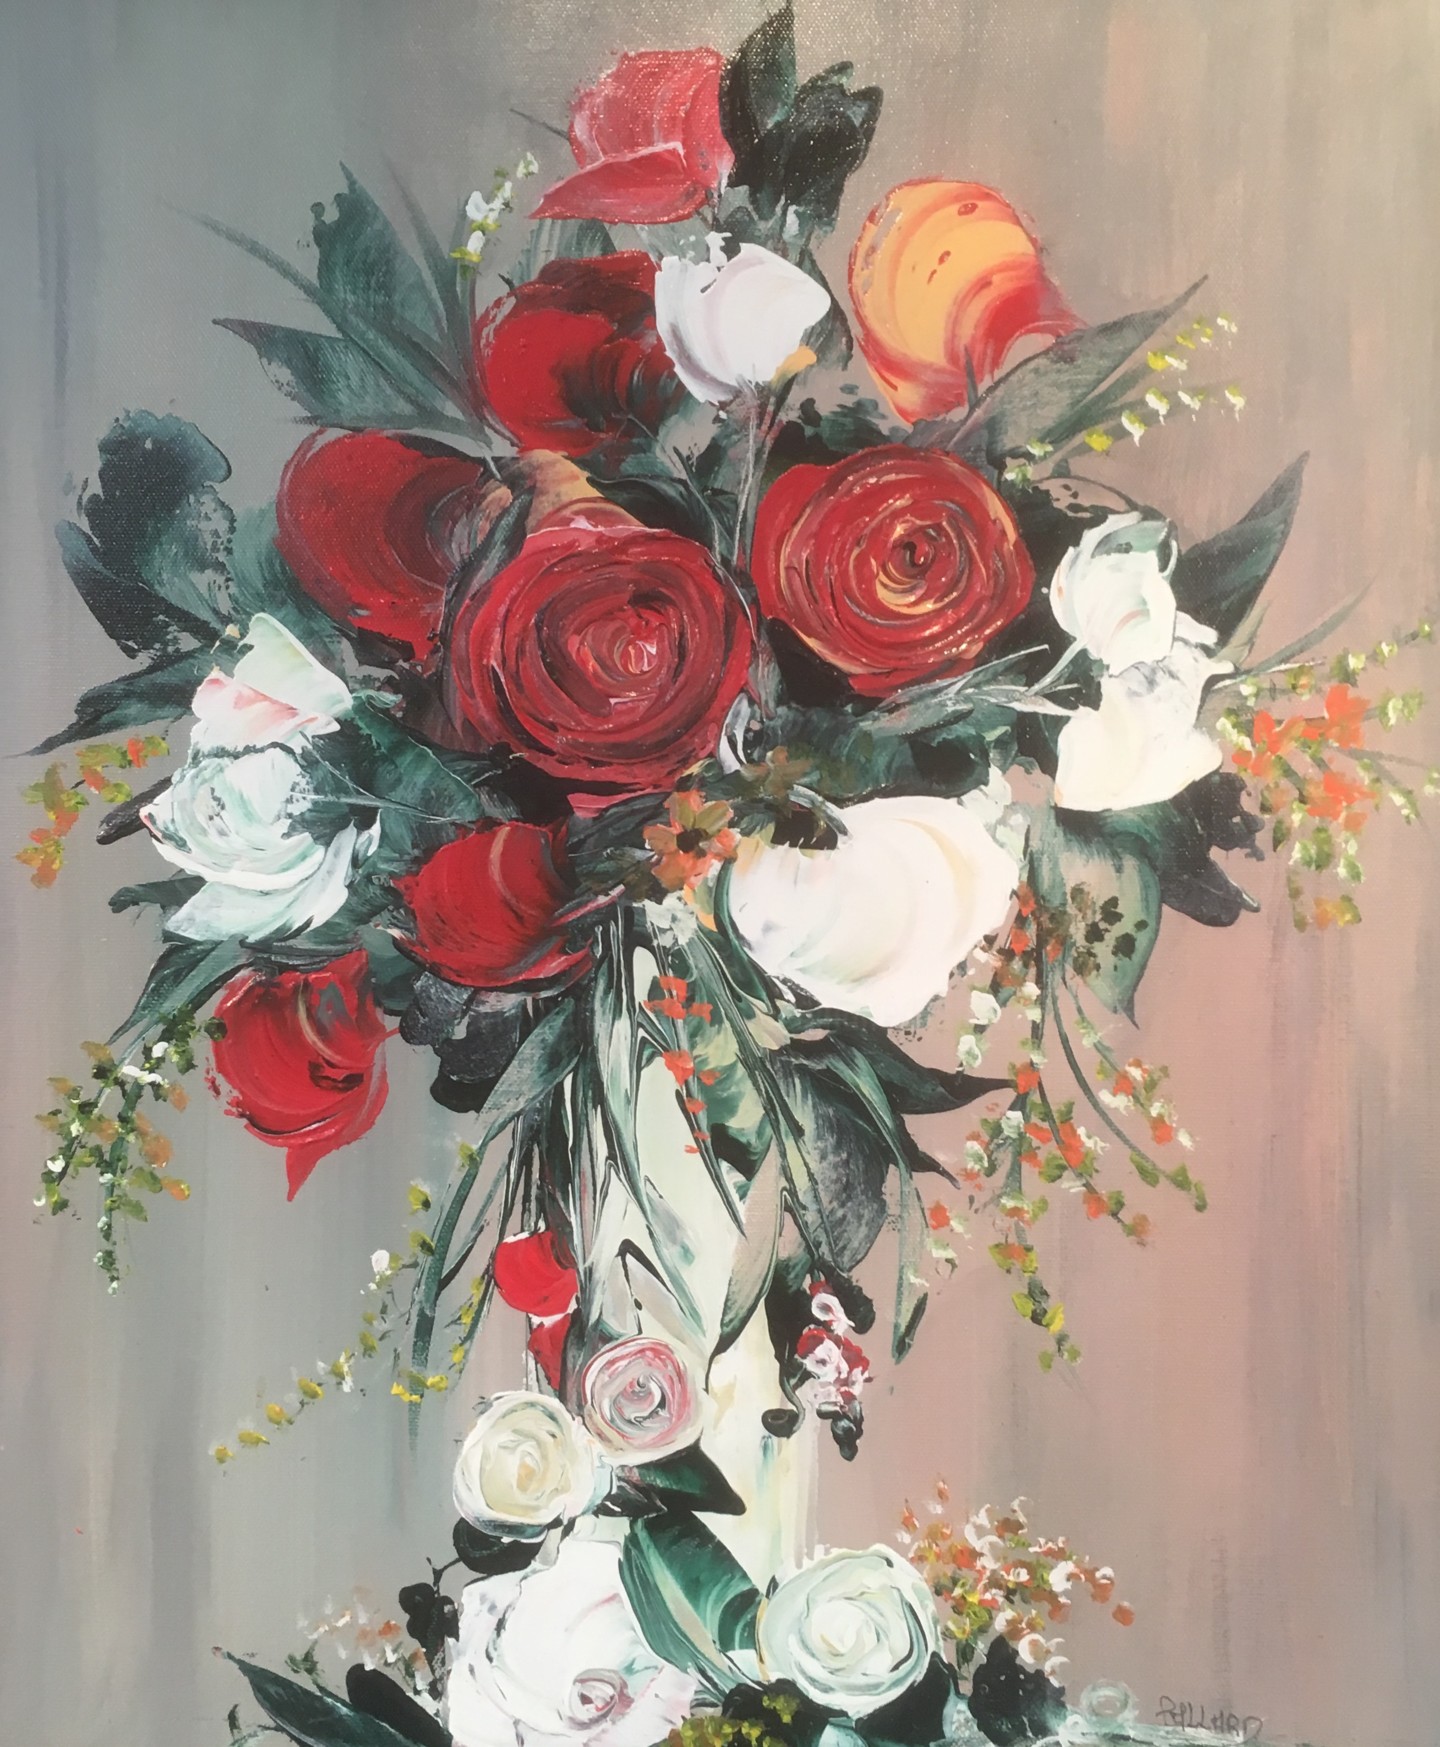 Les Roses Rouges, Painting by Annick Pallard | Artmajeur